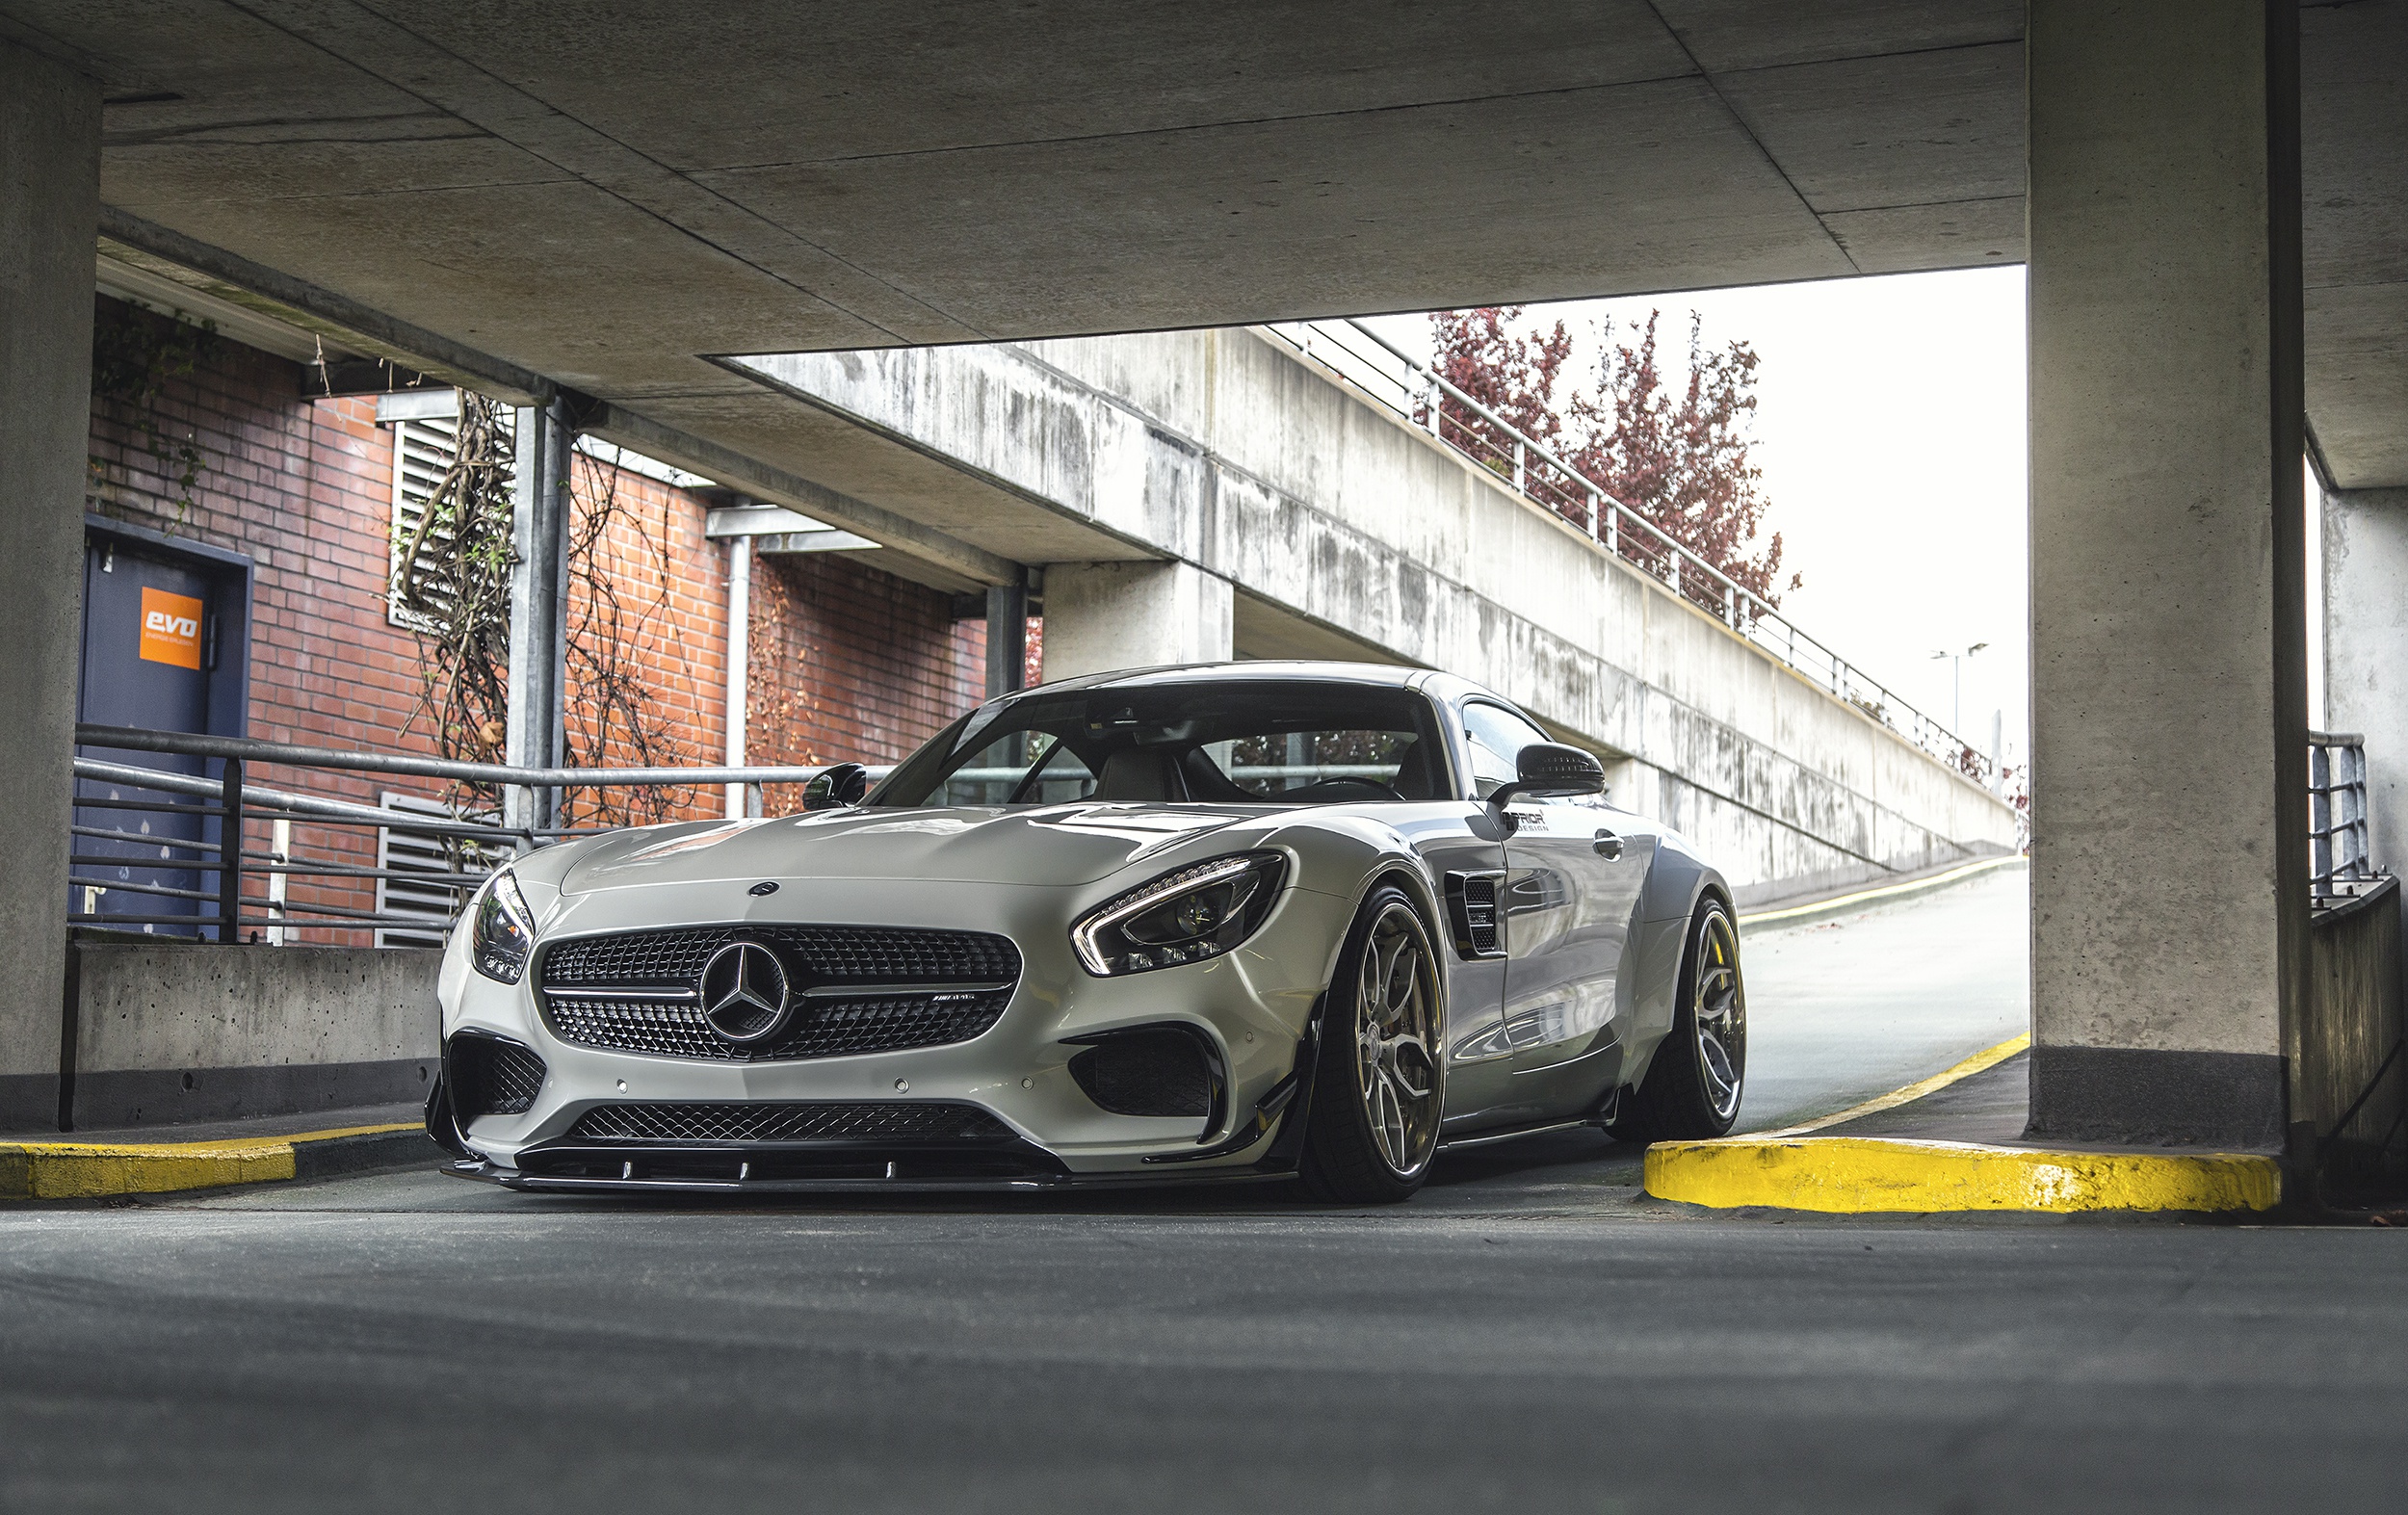 PC Wallpapers vehicles, mercedes amg gt, car, mercedes benz sls amg, mercedes benz, silver car, supercar